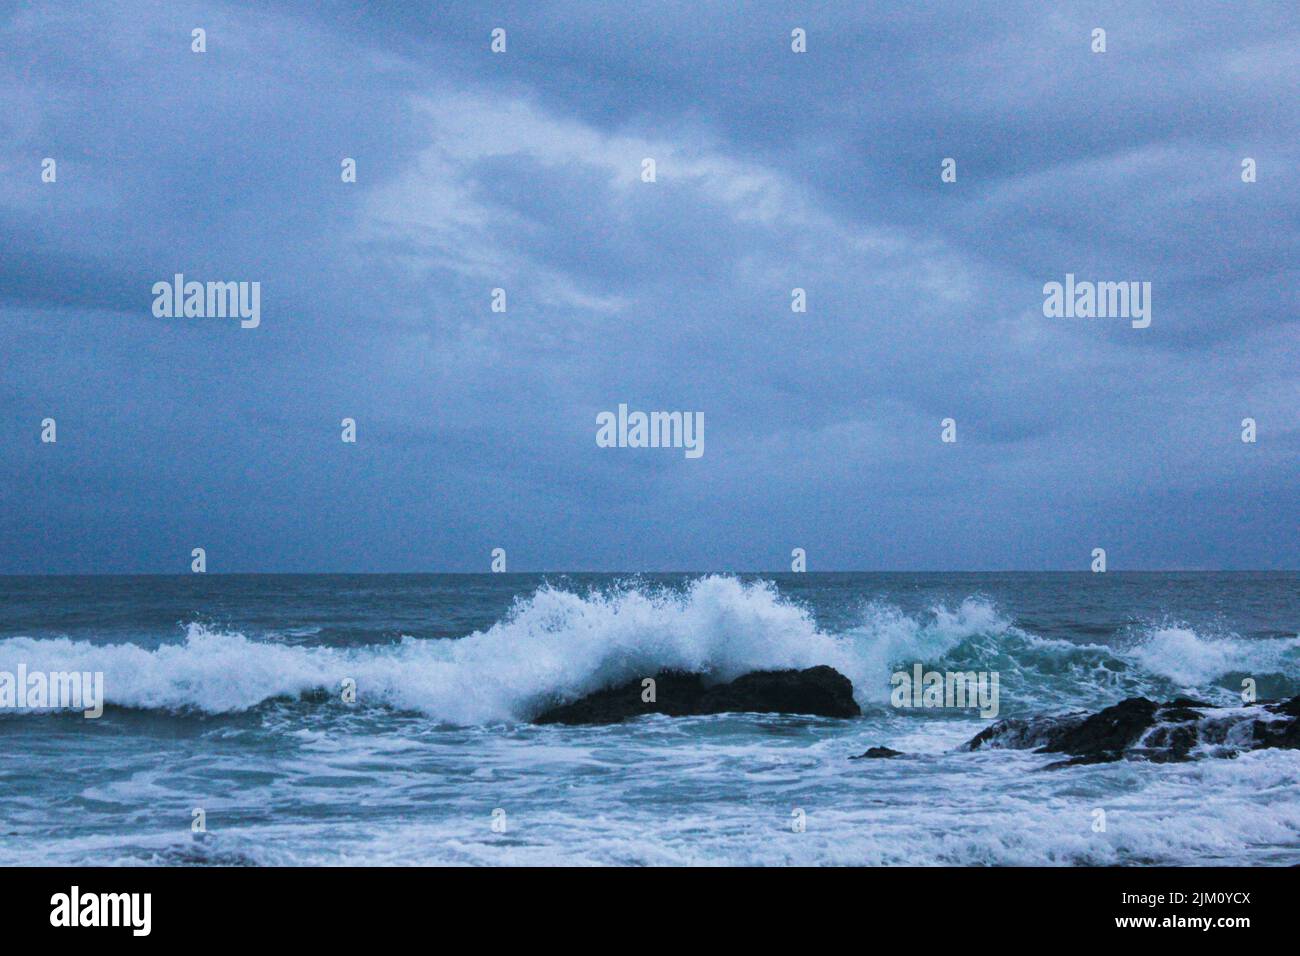 A beautiful landscape of crashing waves on a cloudy day Stock Photo